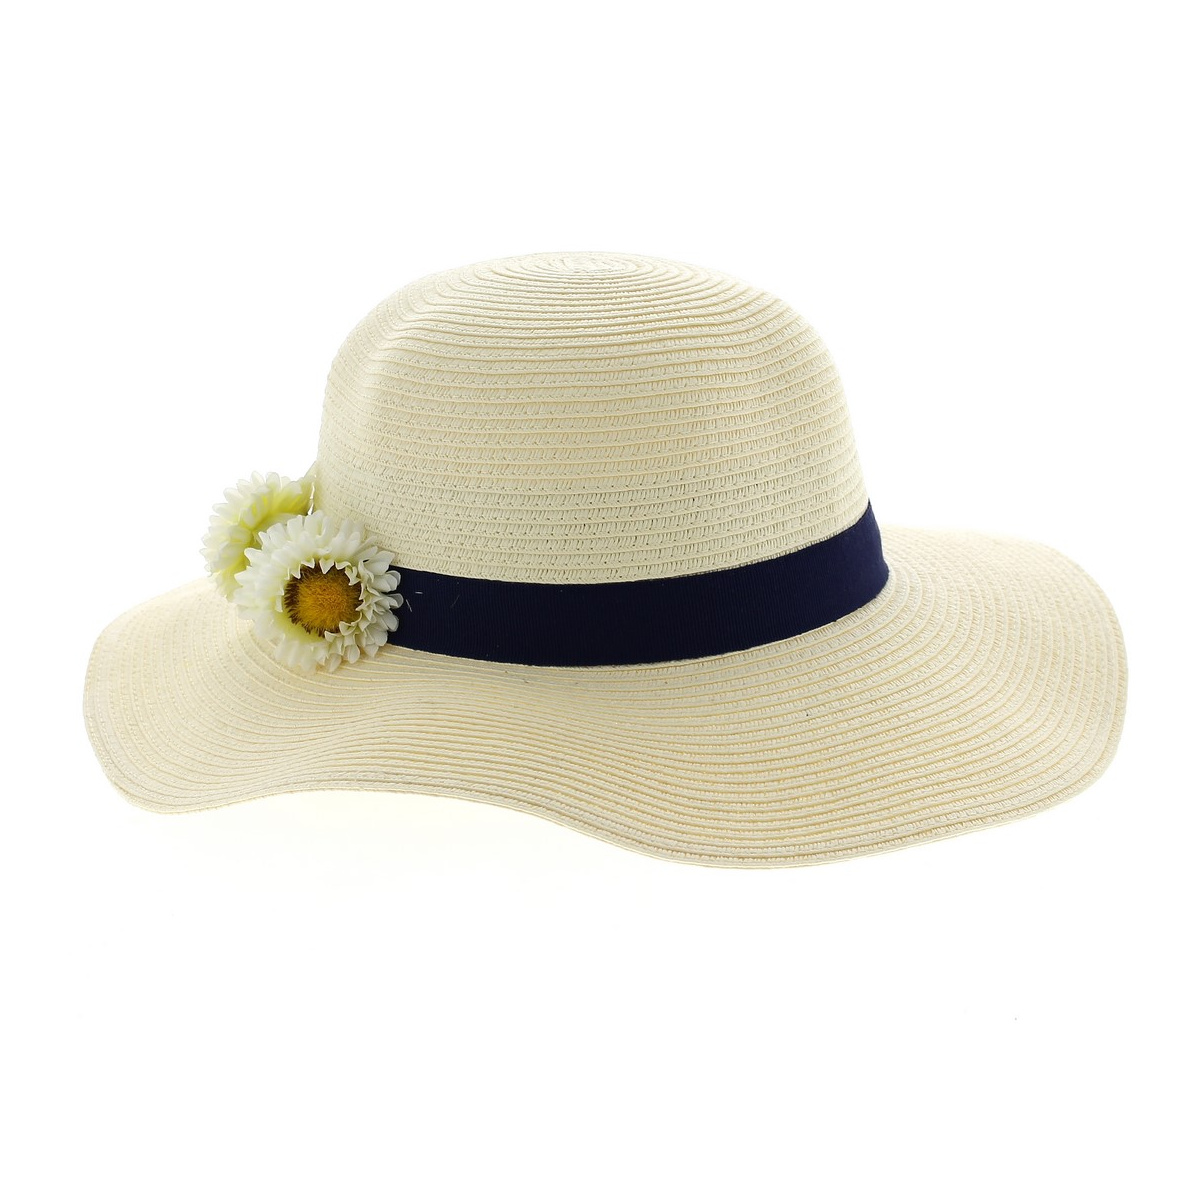 Flowered floppy hat: French creation. Unique model from the